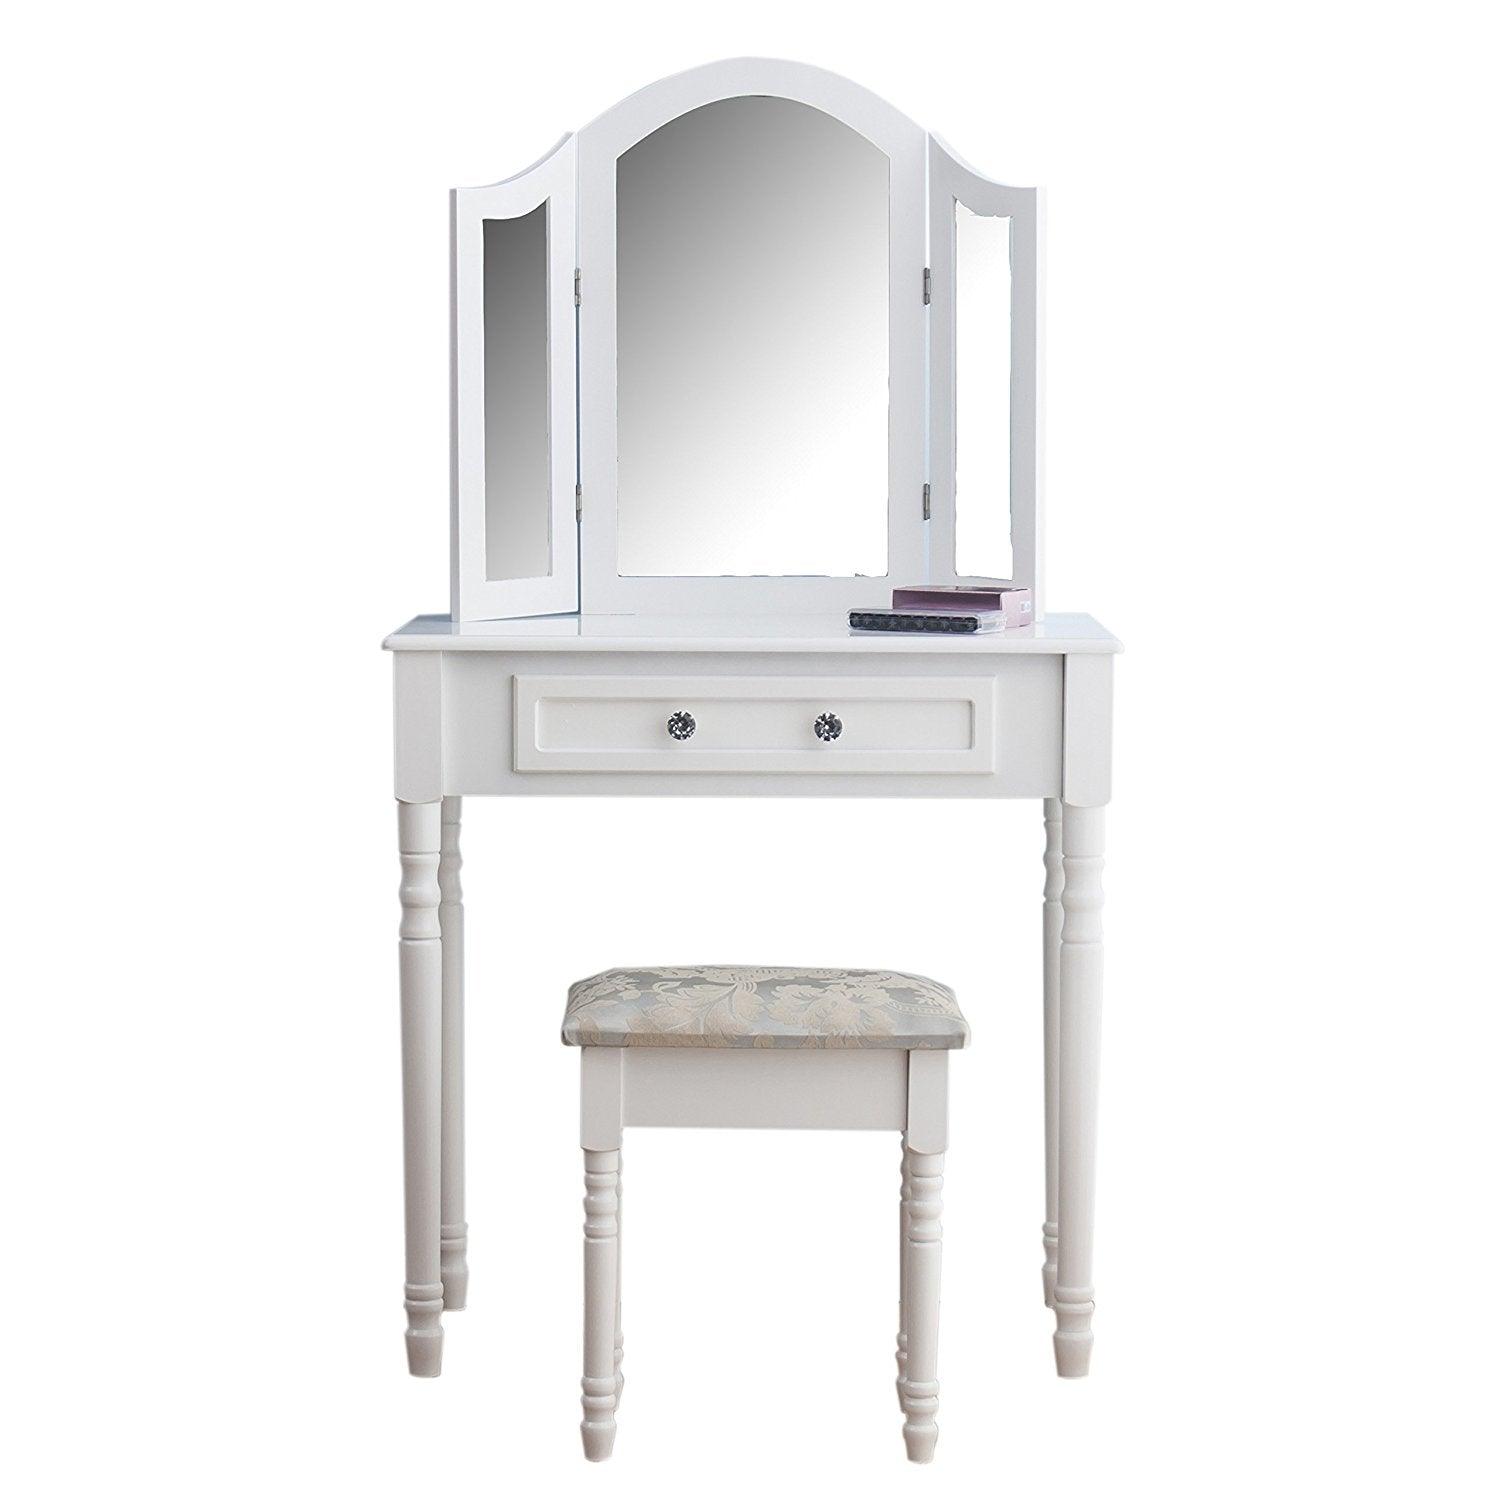 1-Drawer White Dressing Table Set with Stool & Triple Mirror